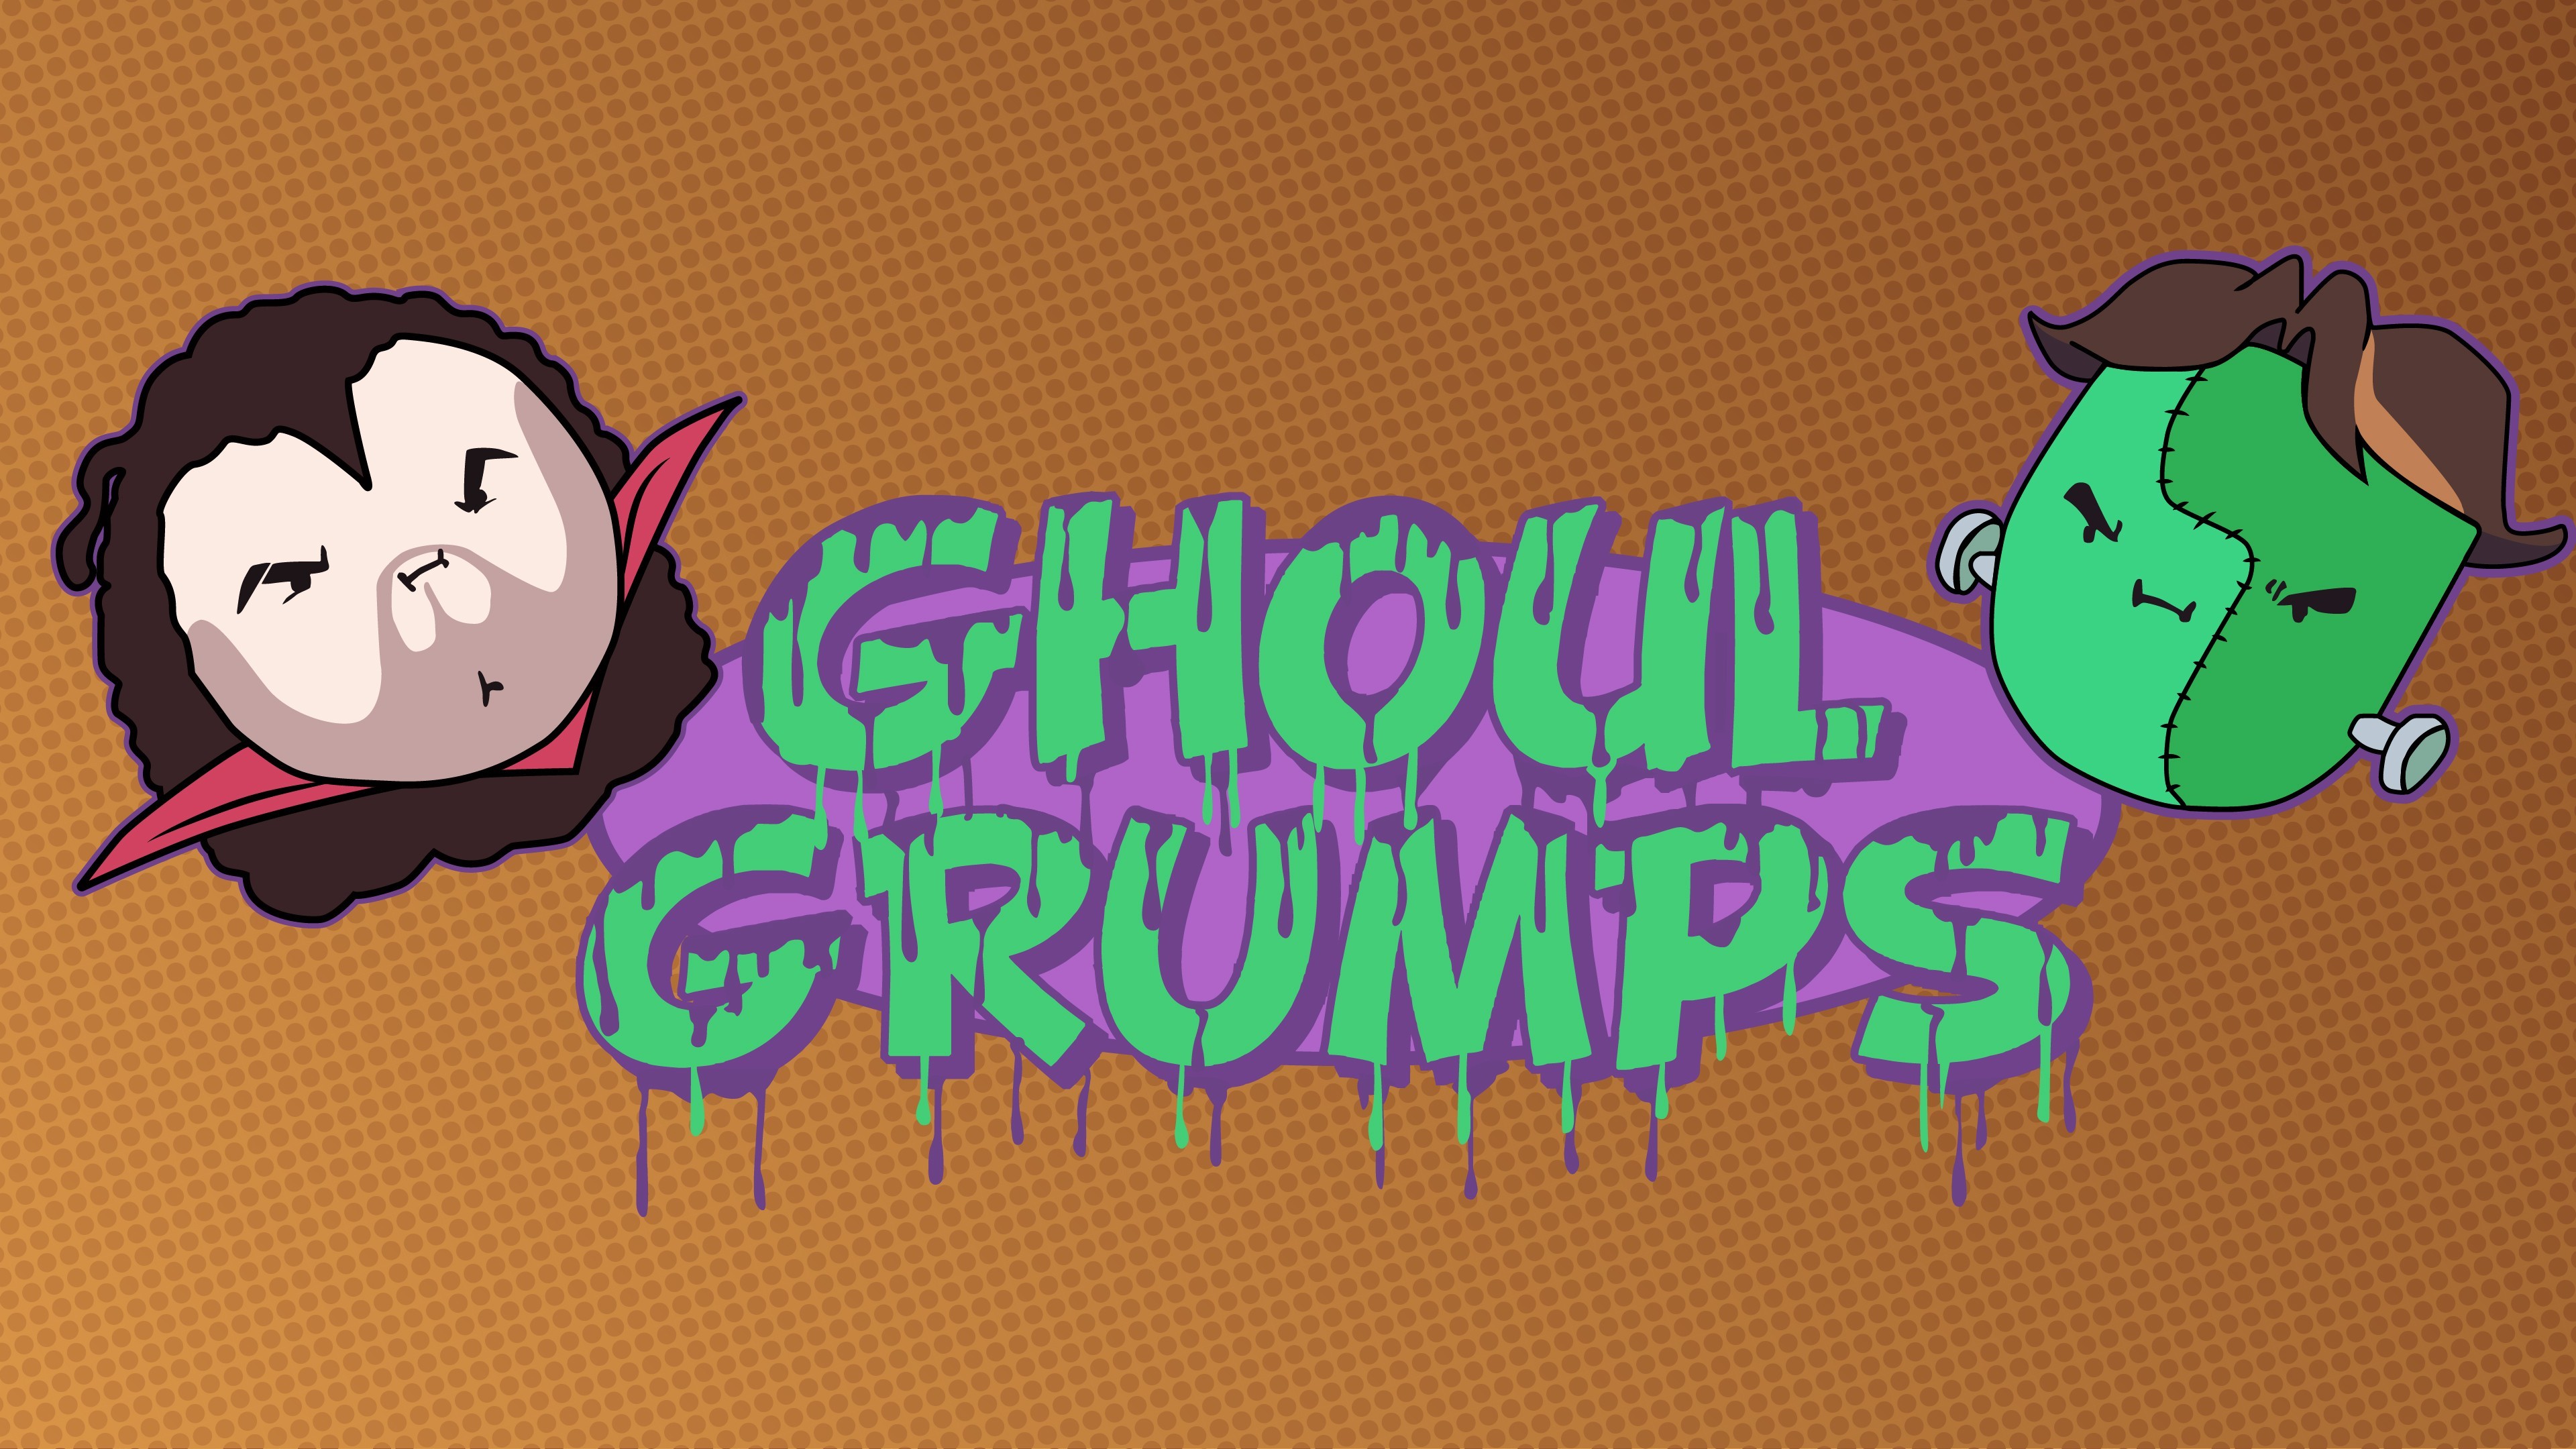 Game Grumps Wallpaper ·① Download Free Cool High Resolution Wallpapers For Desktop Mobile